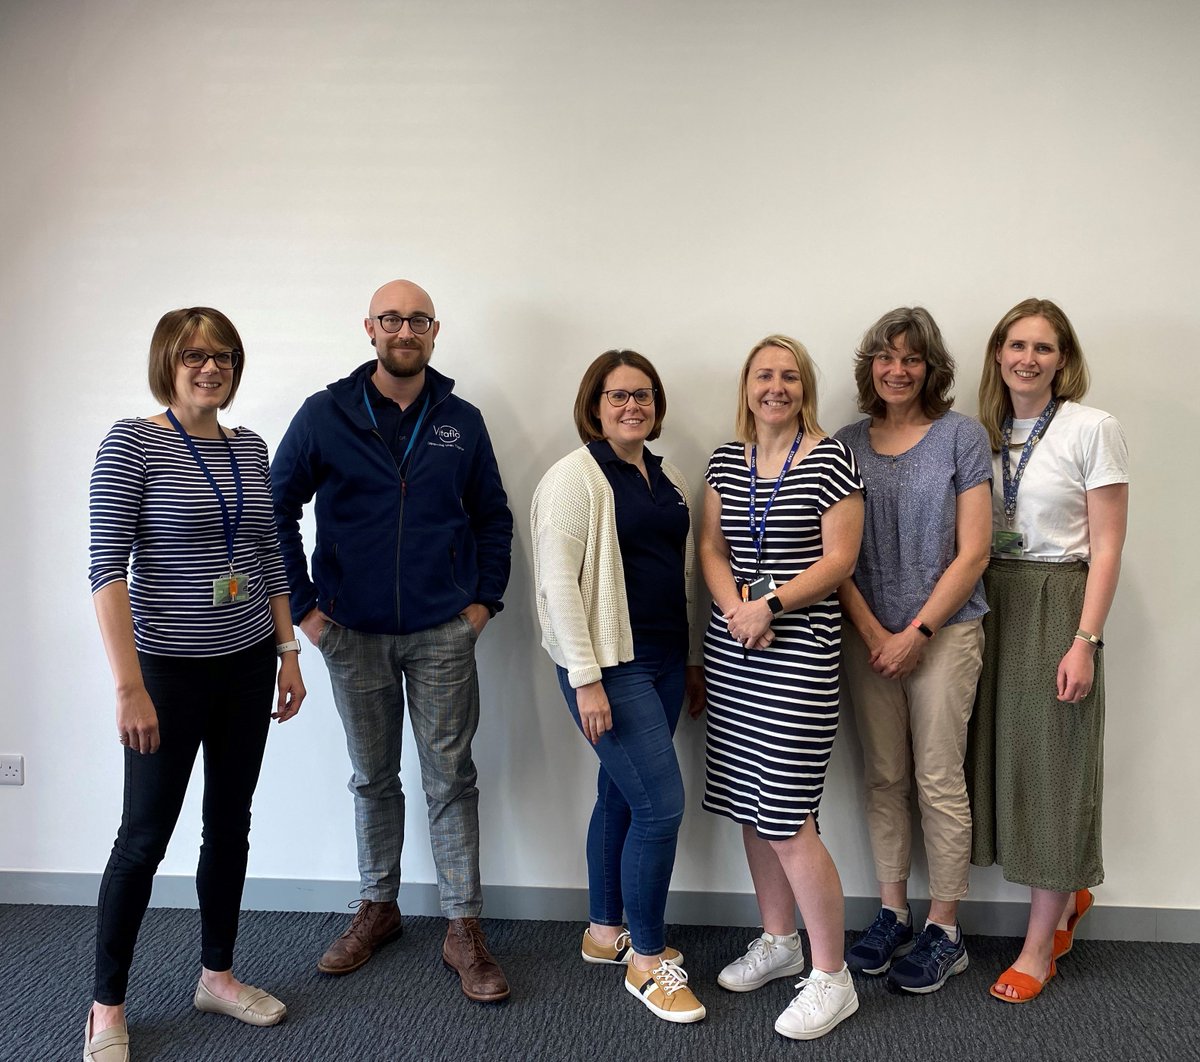 In celebration of Dietitians Week, we'd like to introduce you to another group of dietitians at Vitaflo. The clinical science team are a team of 9 dietitians working with the R&D team on new product development, clinical trials, research and education. #DW2022 #WhatDietitiansDo